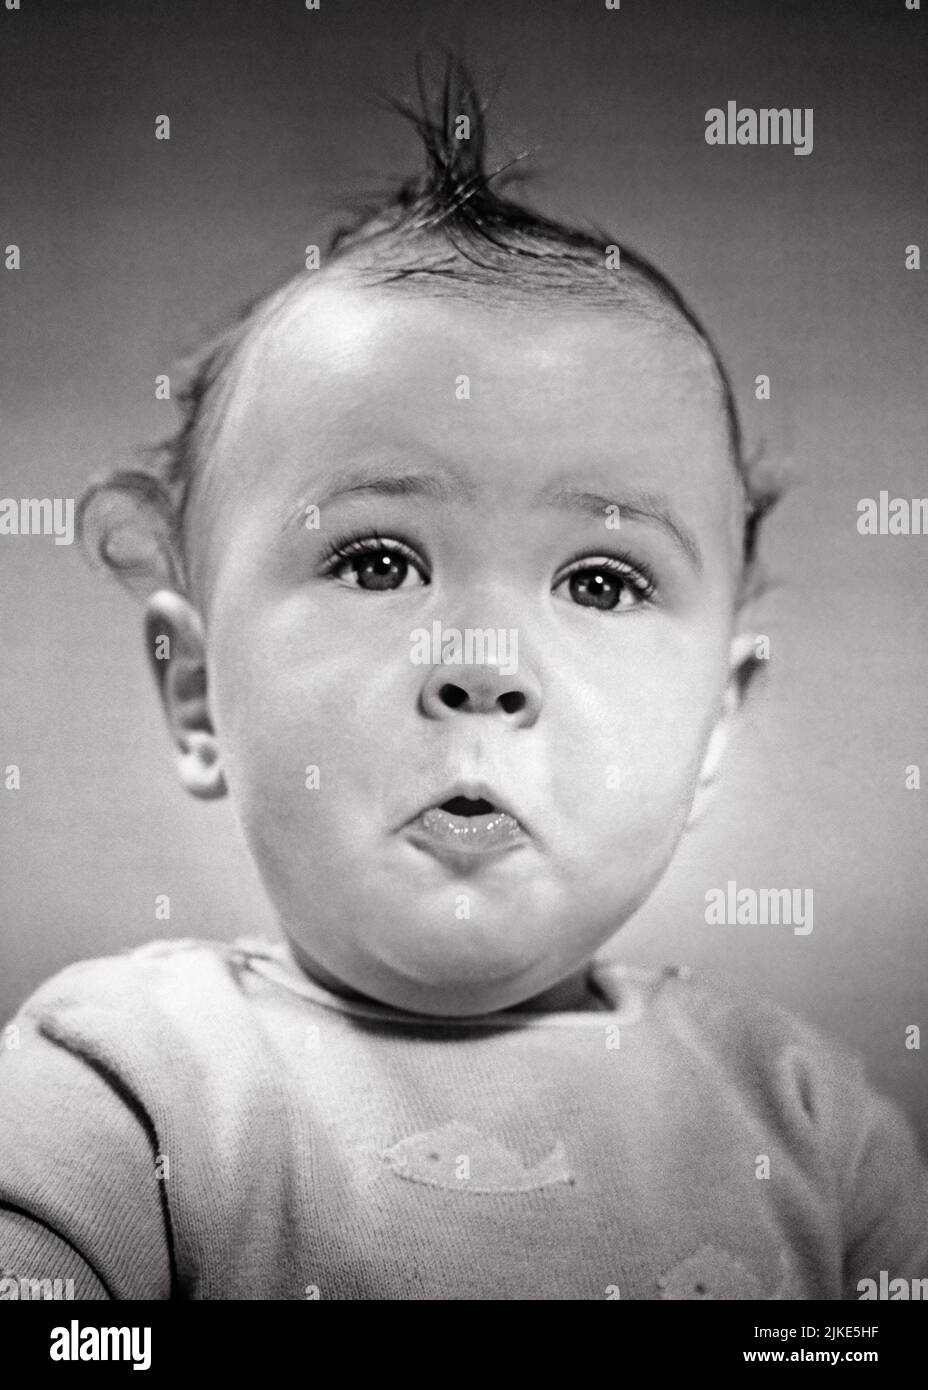 1940s SURPRISED BABY BOY WITH FUNNY FACIAL EXPRESSION LOOKING AT CAMERA WITH TEAR FILLED EYES - b2268 HAR001 HARS SHOCKED COMIC INFANT WORRY LIFESTYLE STUDIO SHOT MOODY HOME LIFE COPY SPACE CRY MALES EXPRESSIONS TROUBLED AMAZED B&W CONCERNED SADNESS EYE CONTACT BRUNETTE WONDER AWE HUMOROUS HEAD AND SHOULDERS ATTENTION EXCITEMENT COMICAL MOOD TEAR CONCEPTUAL GLUM AMAZE COMEDY STARTLE BABY BOY SOURPUSS STUN ASTONISHED DUMBFOUND FILLED JUVENILES MISERABLE STARTLED BLACK AND WHITE CAUCASIAN ETHNICITY HAR001 OLD FASHIONED Stock Photo